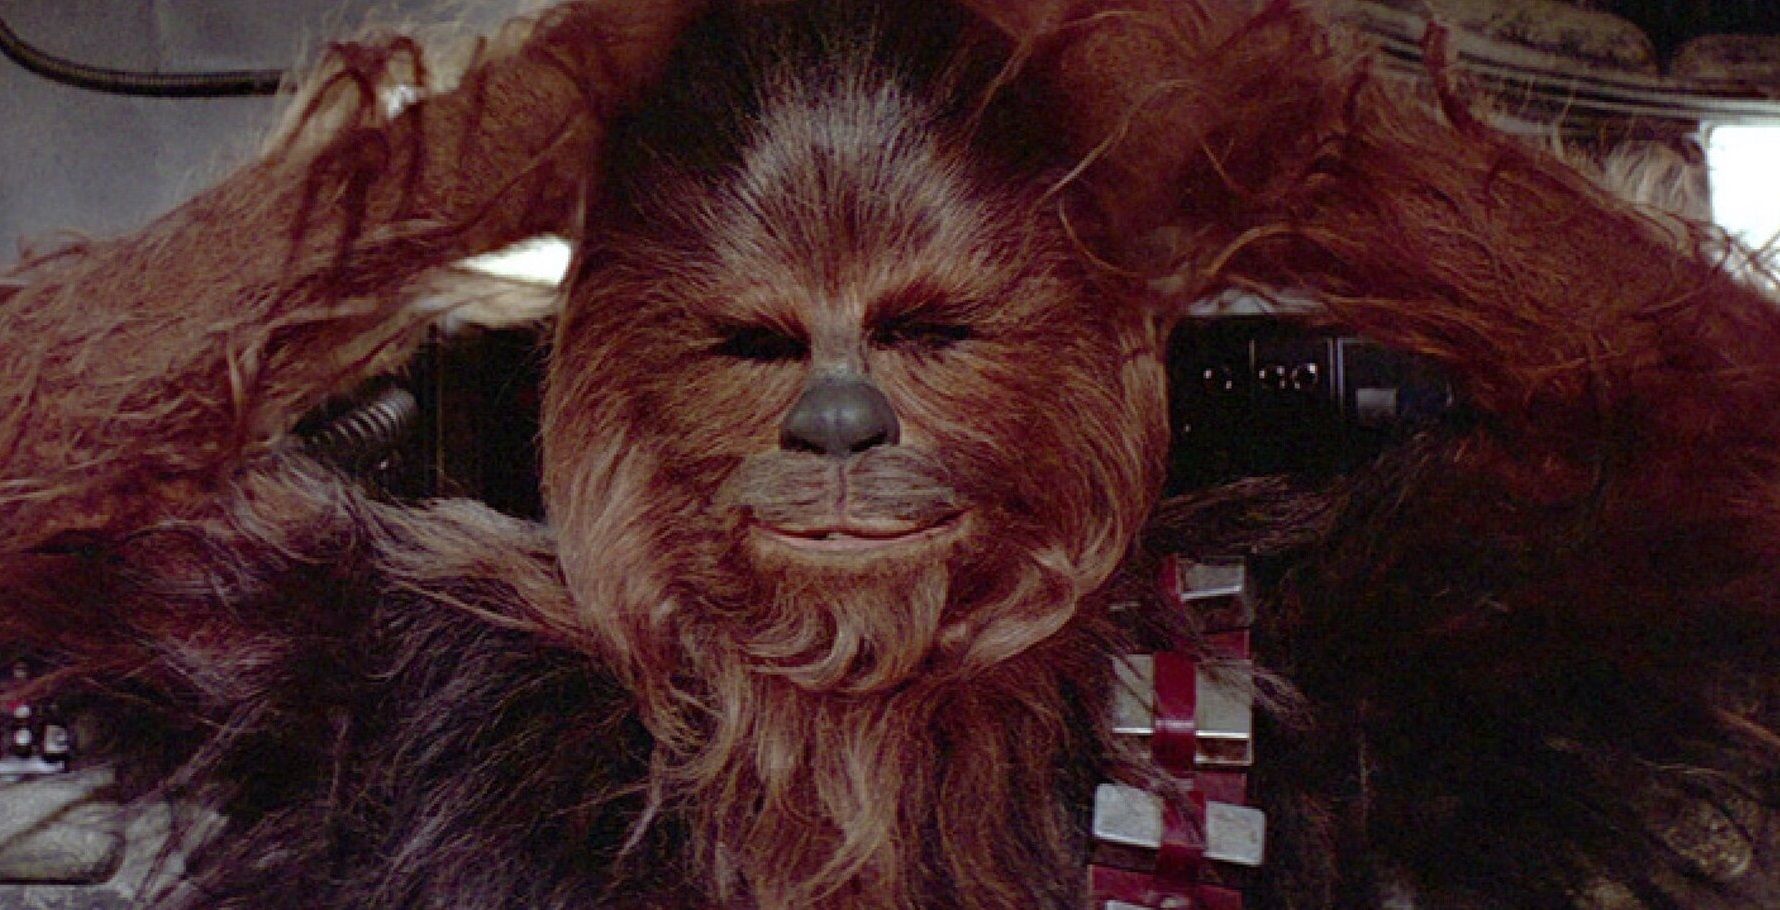 Star Wars The 10 Best Original Trilogy Characters